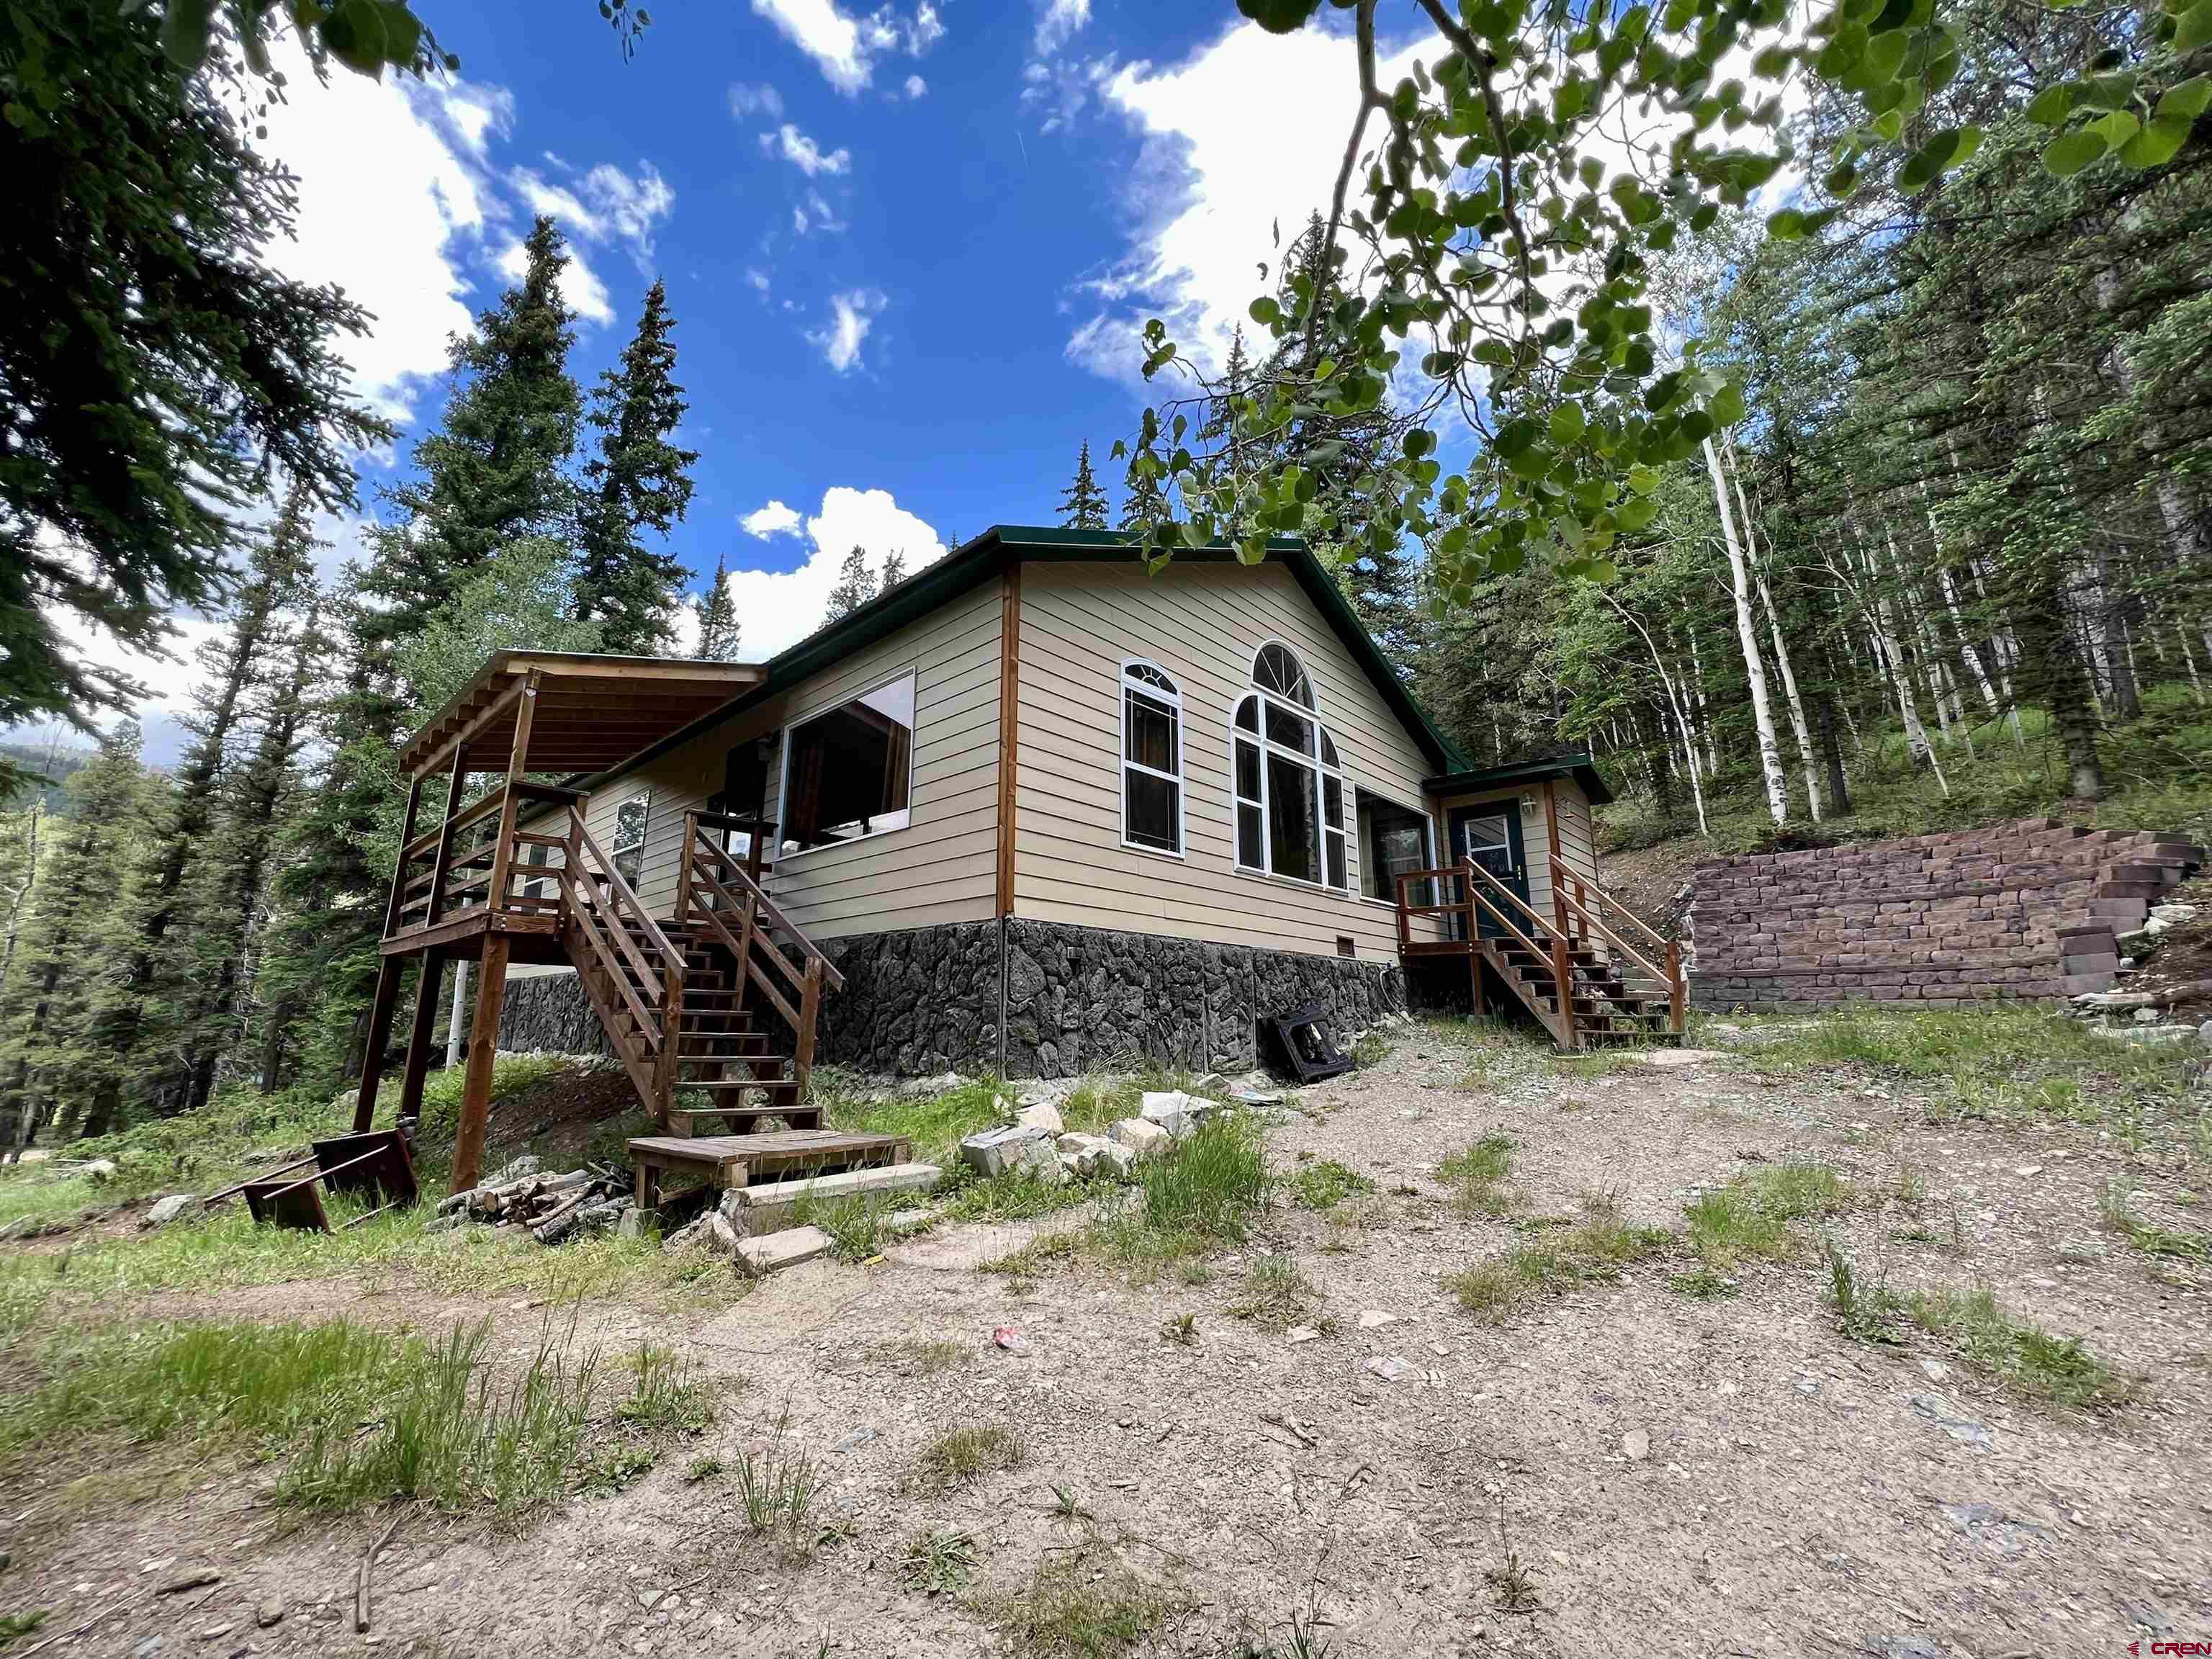 Fantastic summer home in the Town of Pitkin features 3 bedrooms/2 full baths with cozy woodstove in the living room, large open kitchen, laundry room and work shed.  Tucked away in the trees, with easy access to trail riding.  Built in 2012, great condition, tile entryway, carpet bedrooms & wood flooring too!